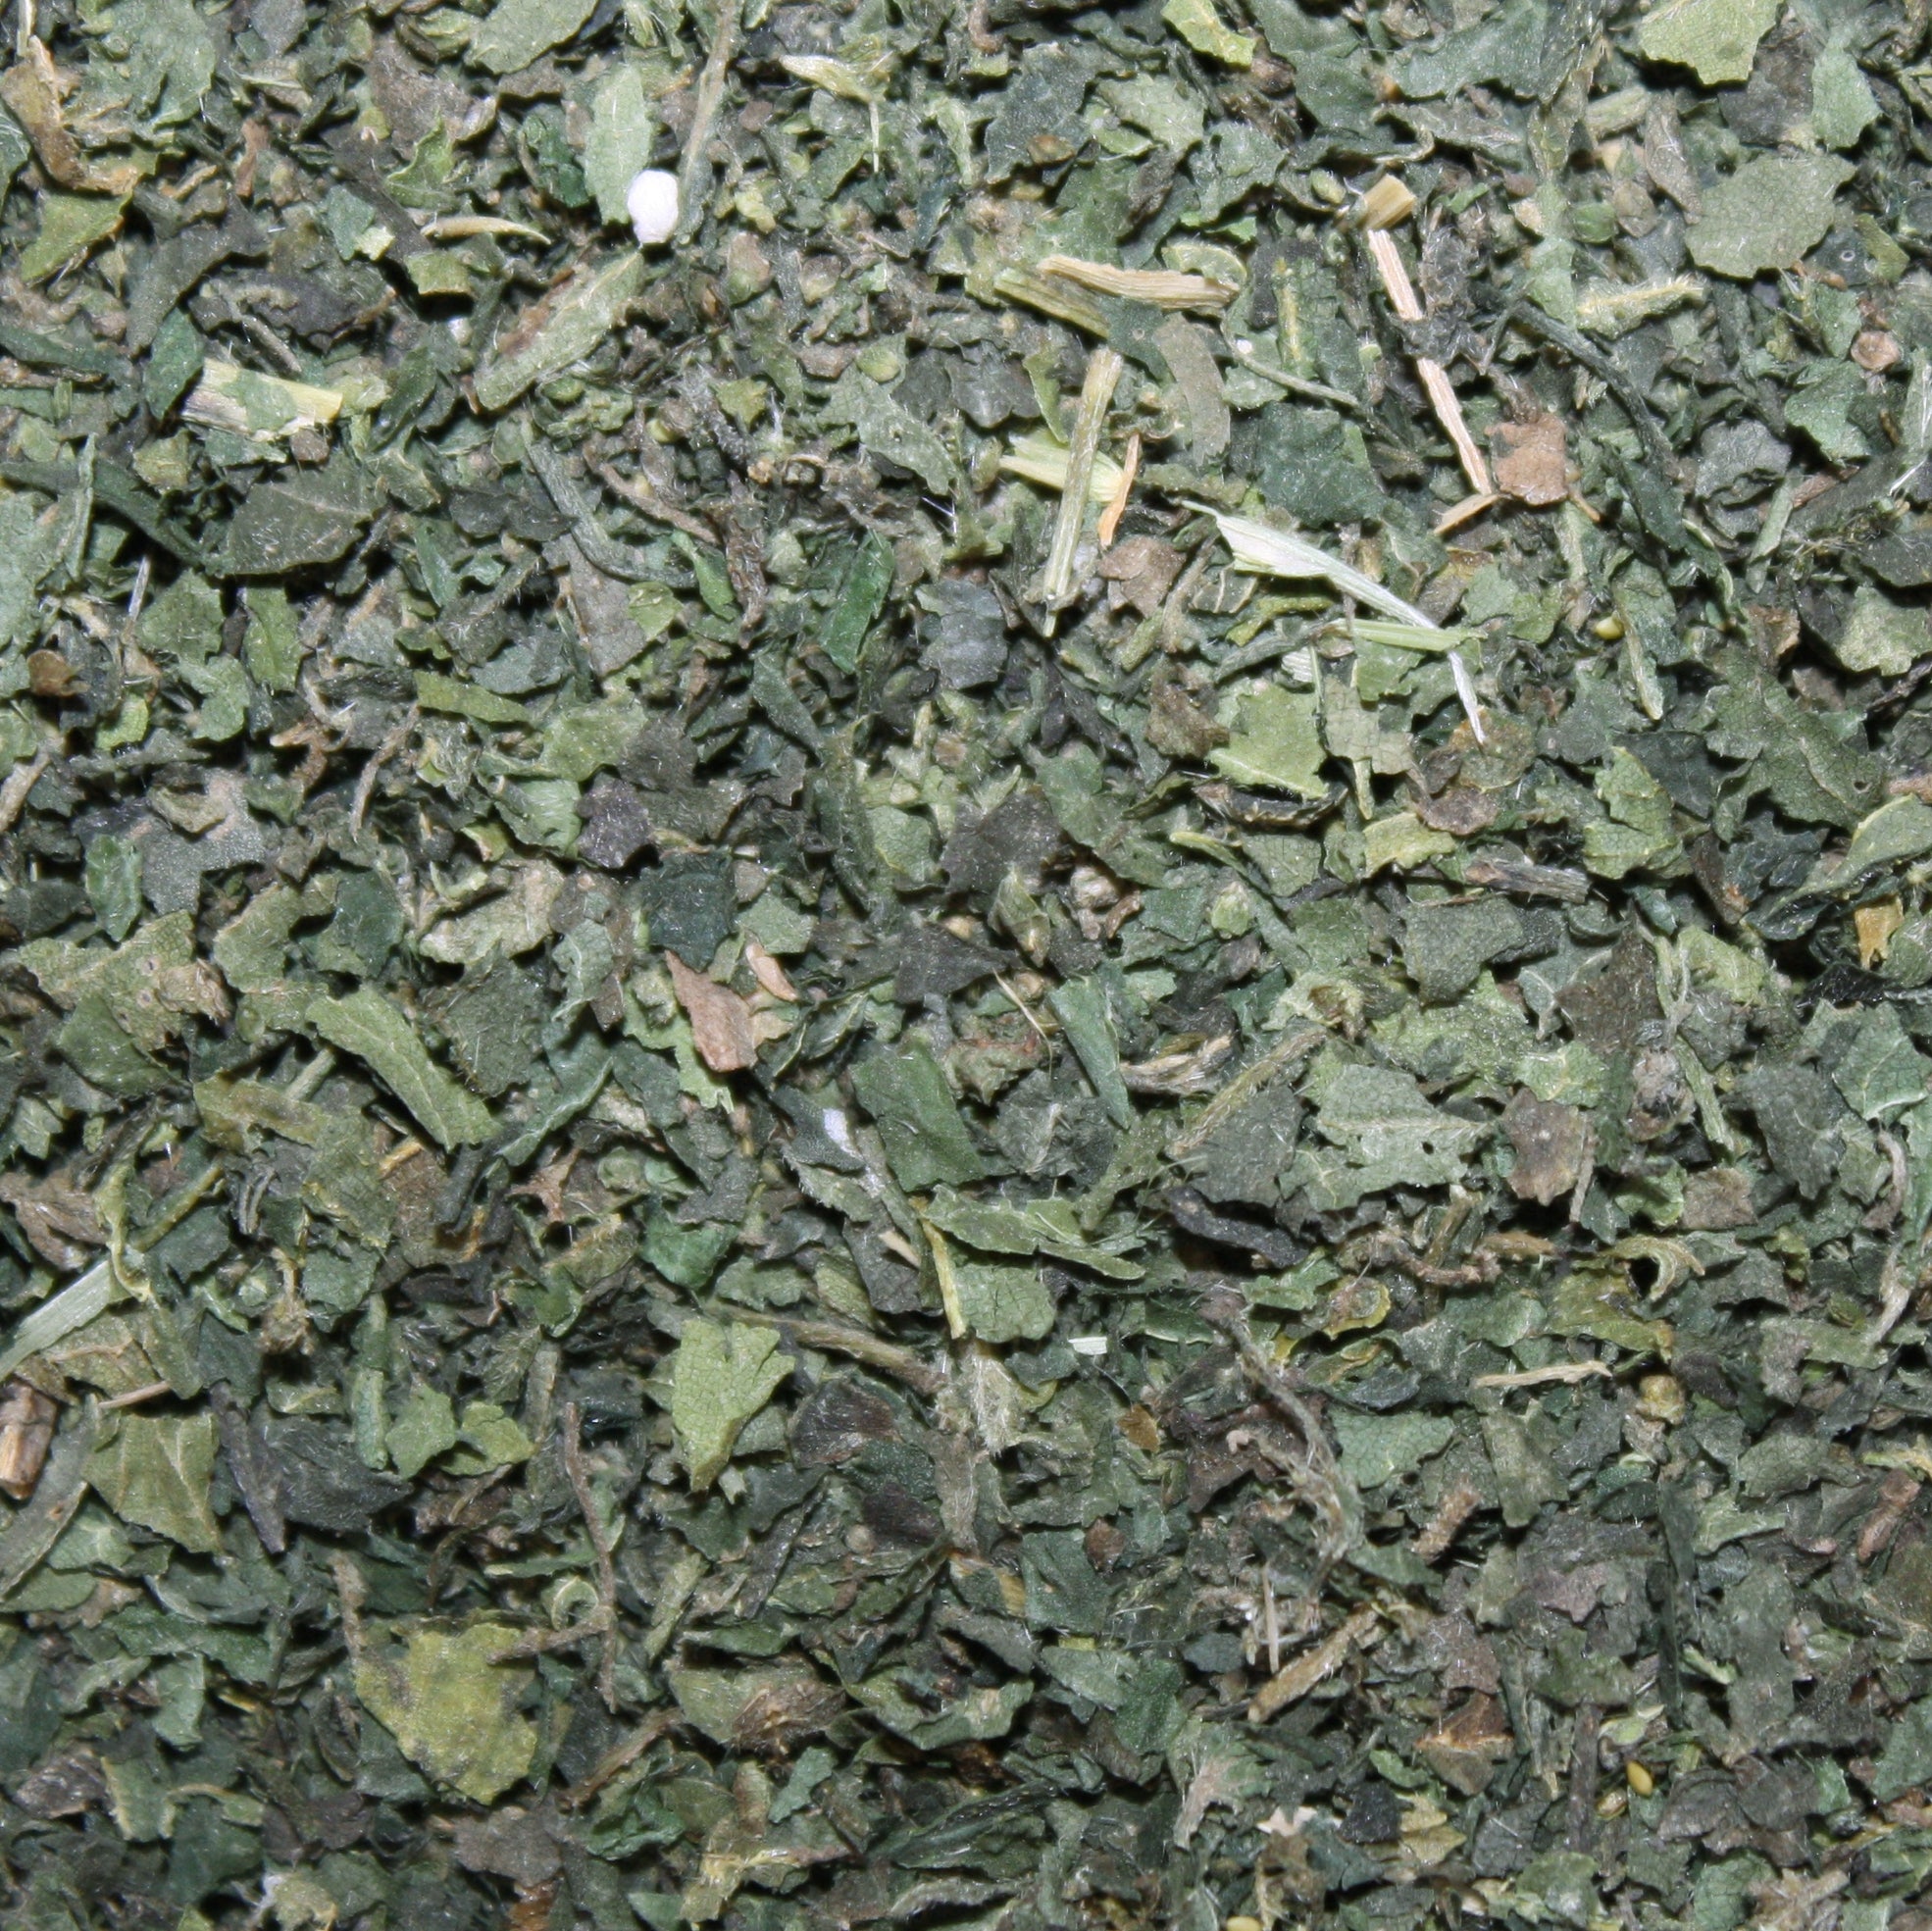 Nettle Leaf magickal uses include dispelling darkness & fear, strengthening the will, and aiding in the ability to handle emergencies